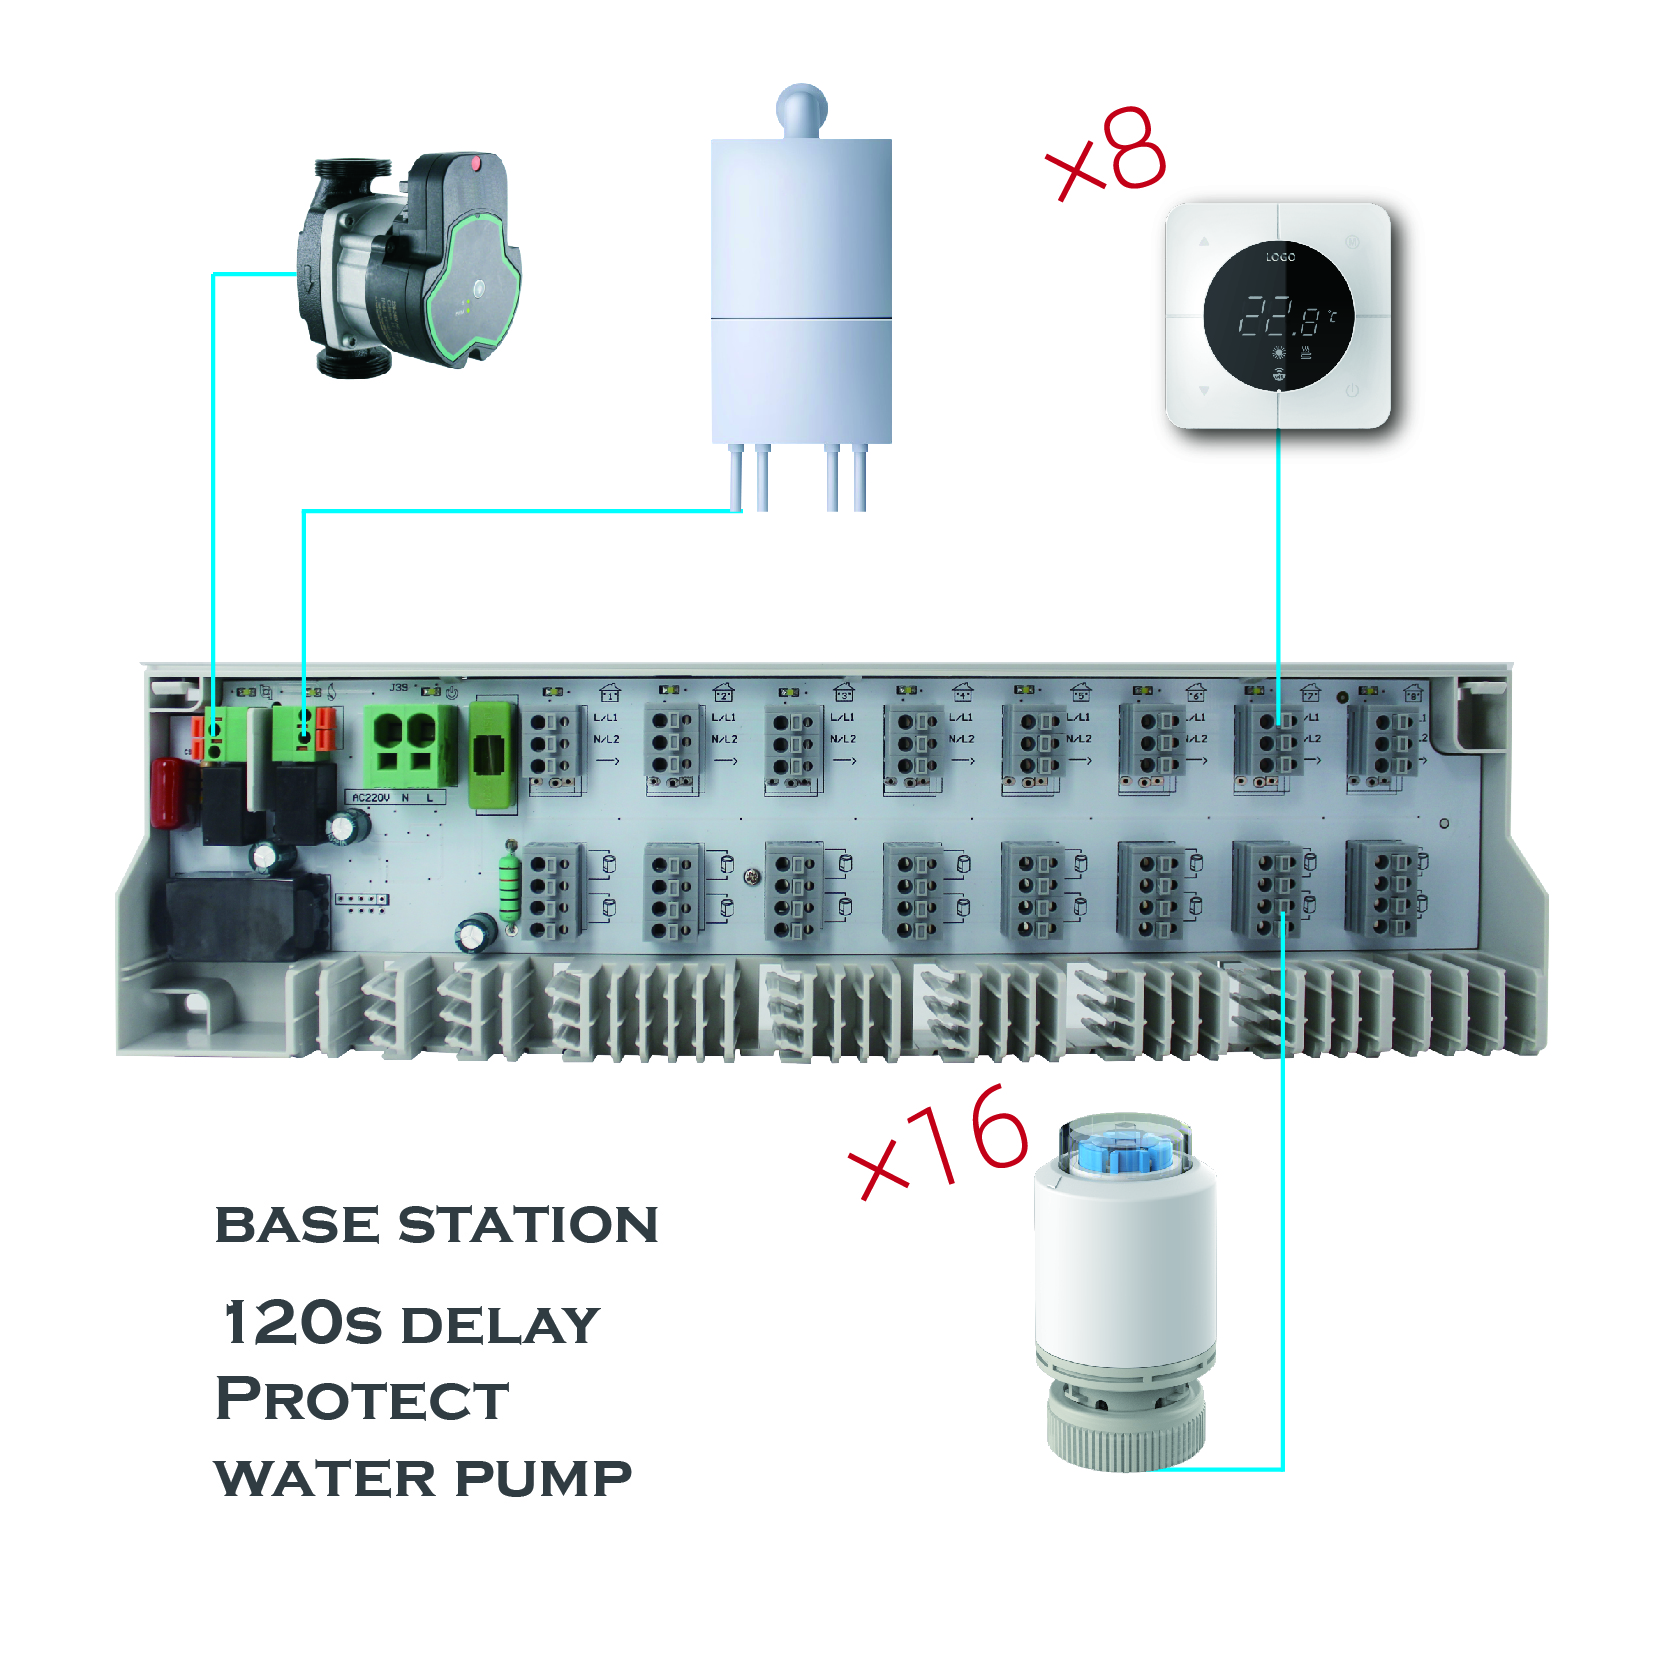 Wired base station controller with pump and boiler control-950006PL-SMLG